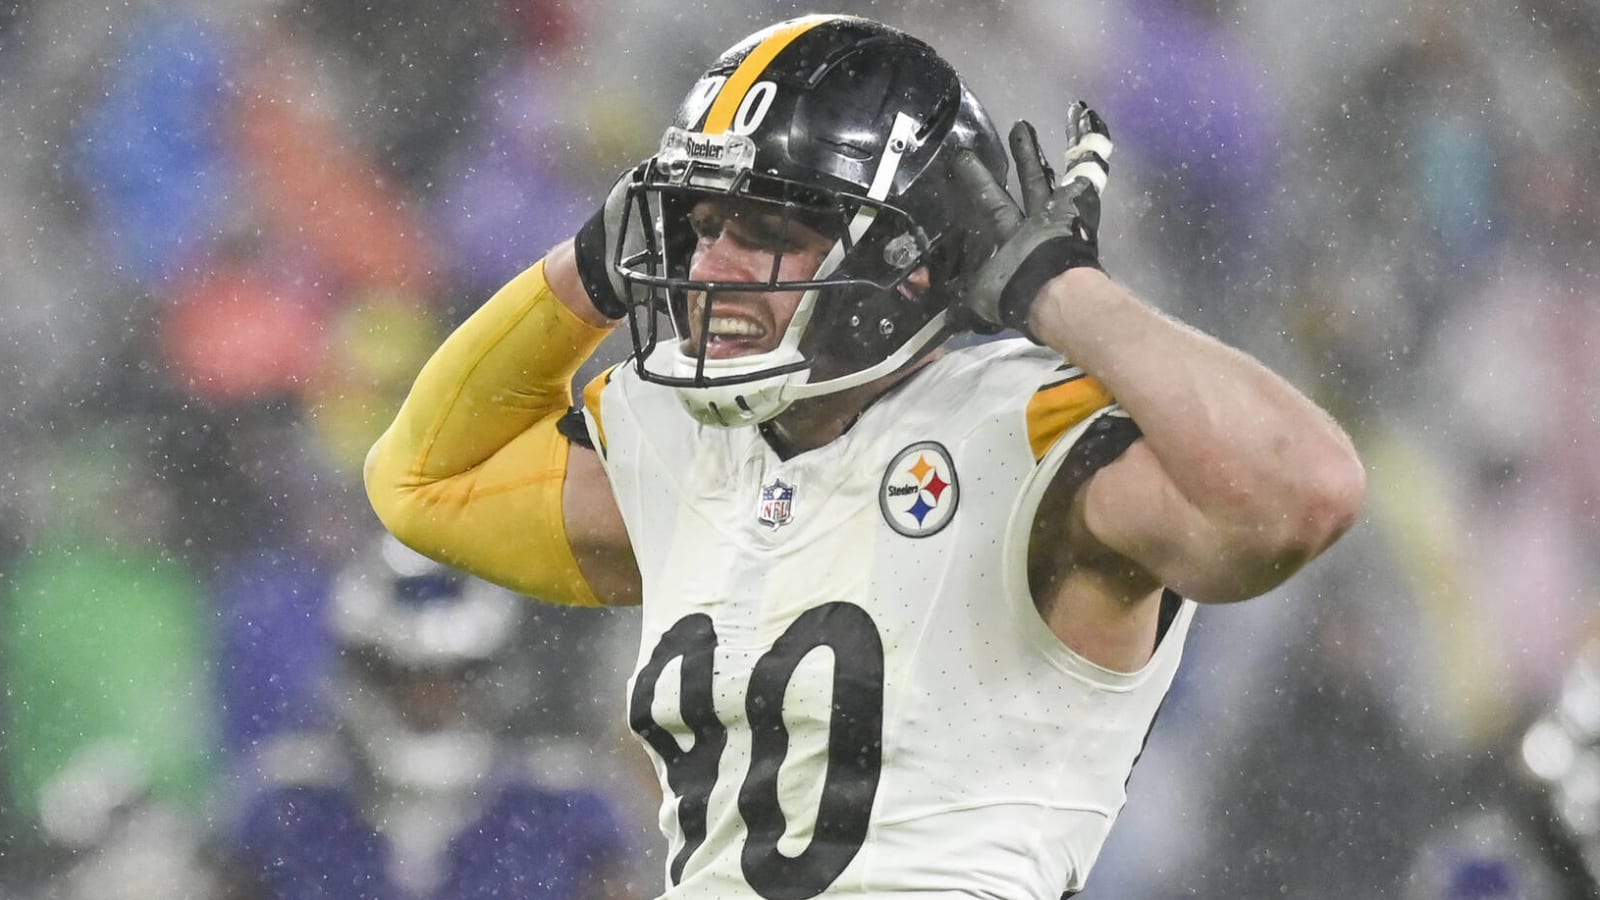 Steelers’ TJ Watt Absolutely 'Not A Top 5 Pass Rusher' According To Cowboys’ Micah Parsons